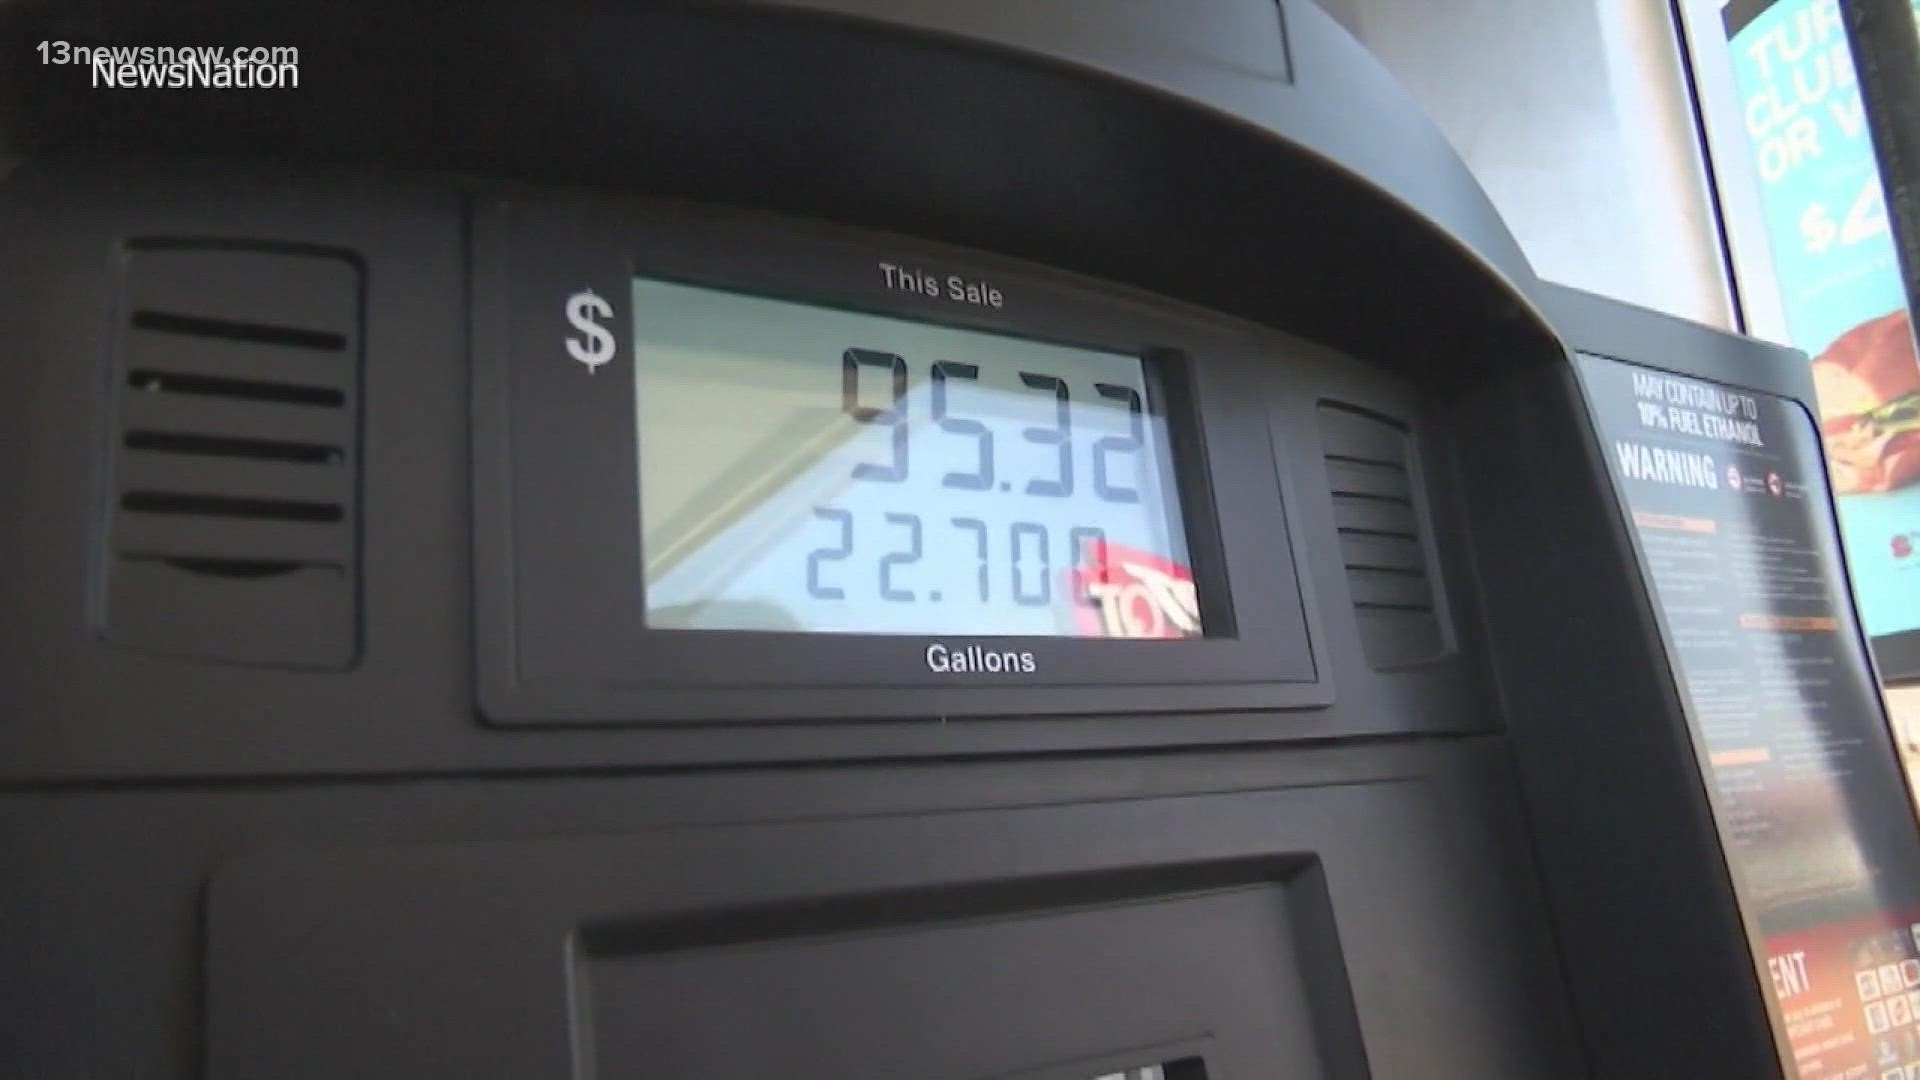 The ODU professor says he wouldn't be surprised to see prices rise to $5.00 per gallon as Russia's invasion into Ukraine carries on.